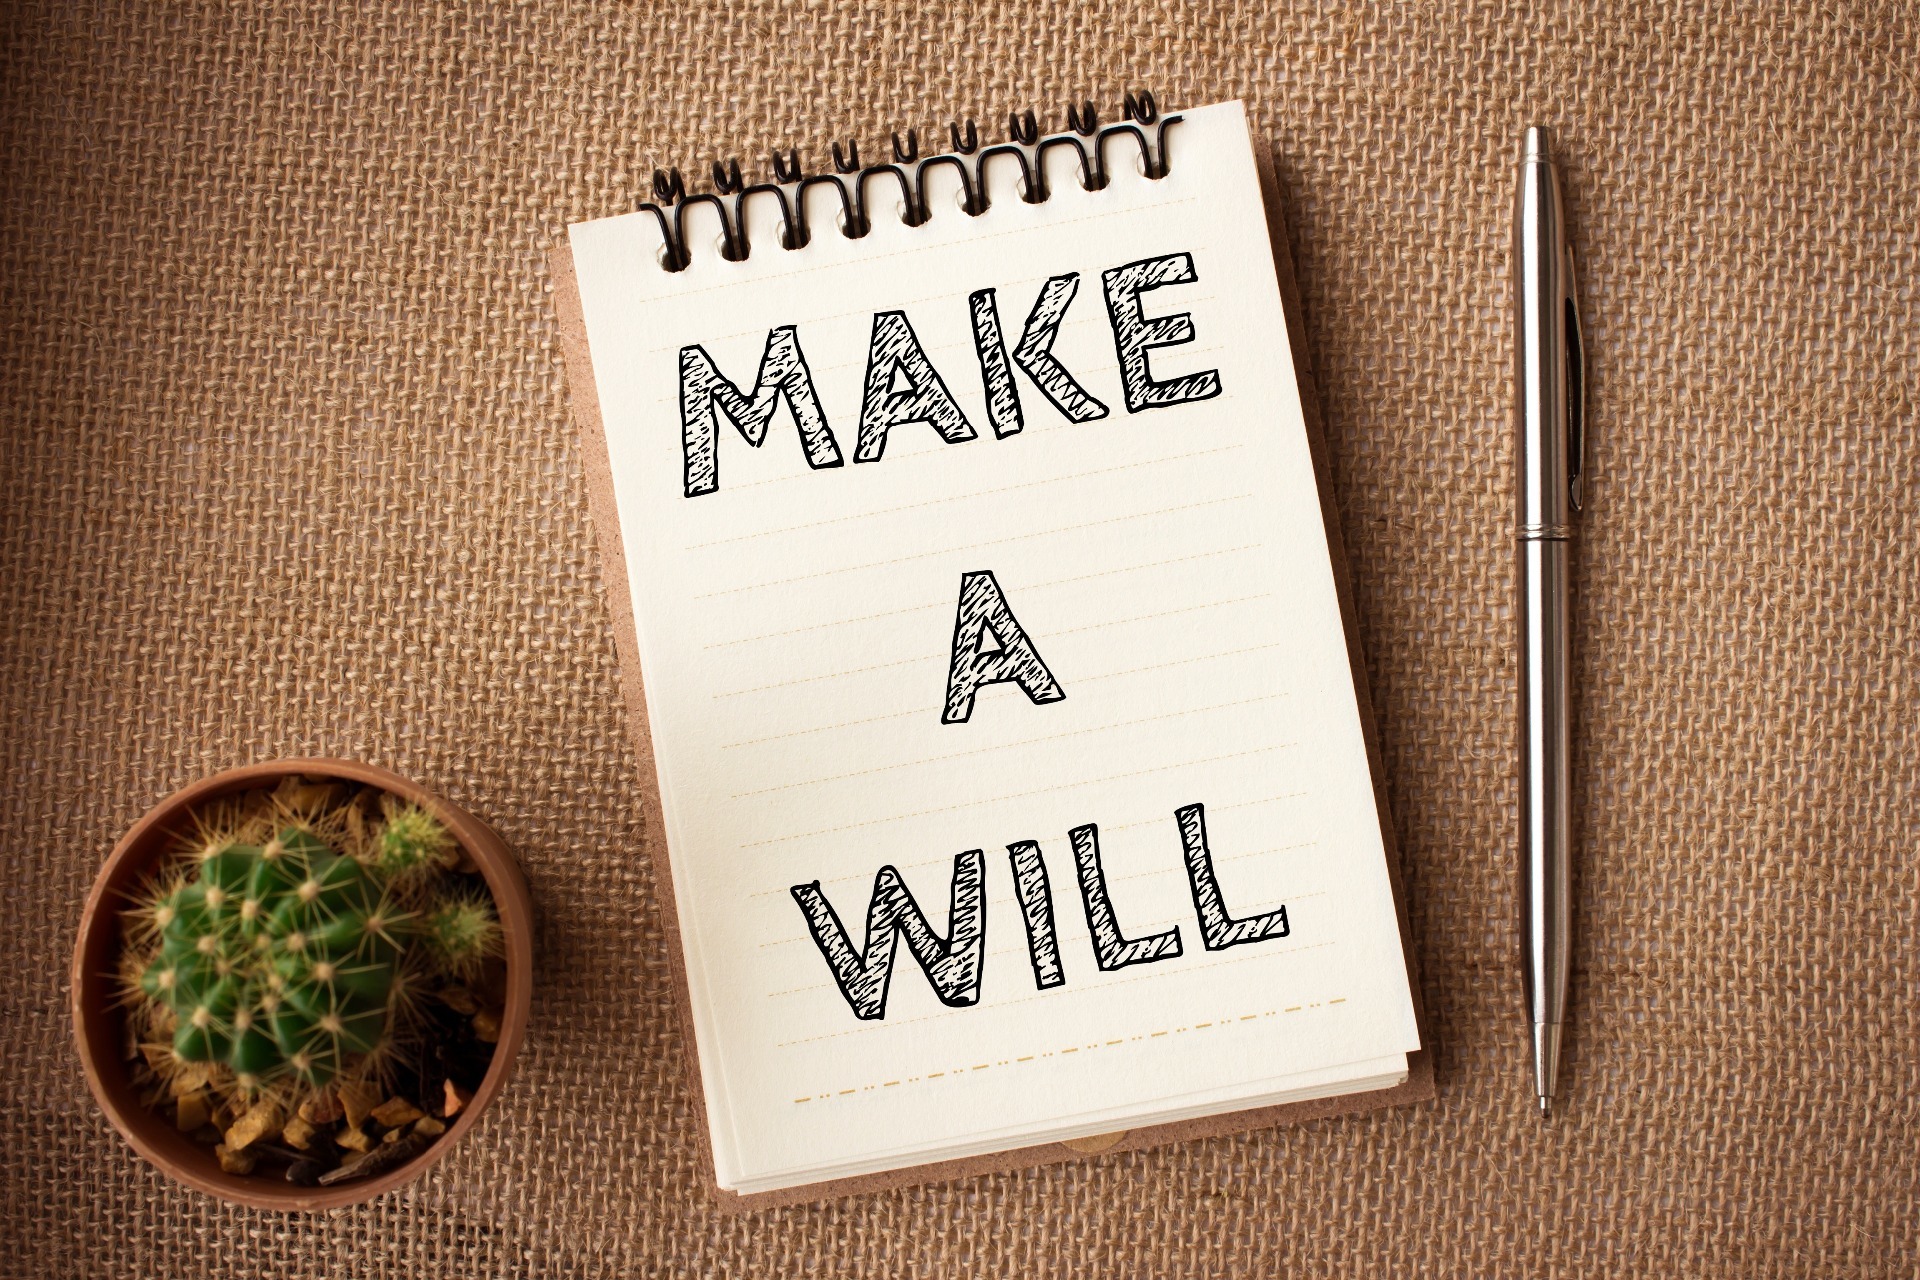 "Make a Will" written on a small notebook, against a table, with a cactus and a pen; our Wills Solicitors can assist you with the preparation of your Will all for an affordable fixed-fee.